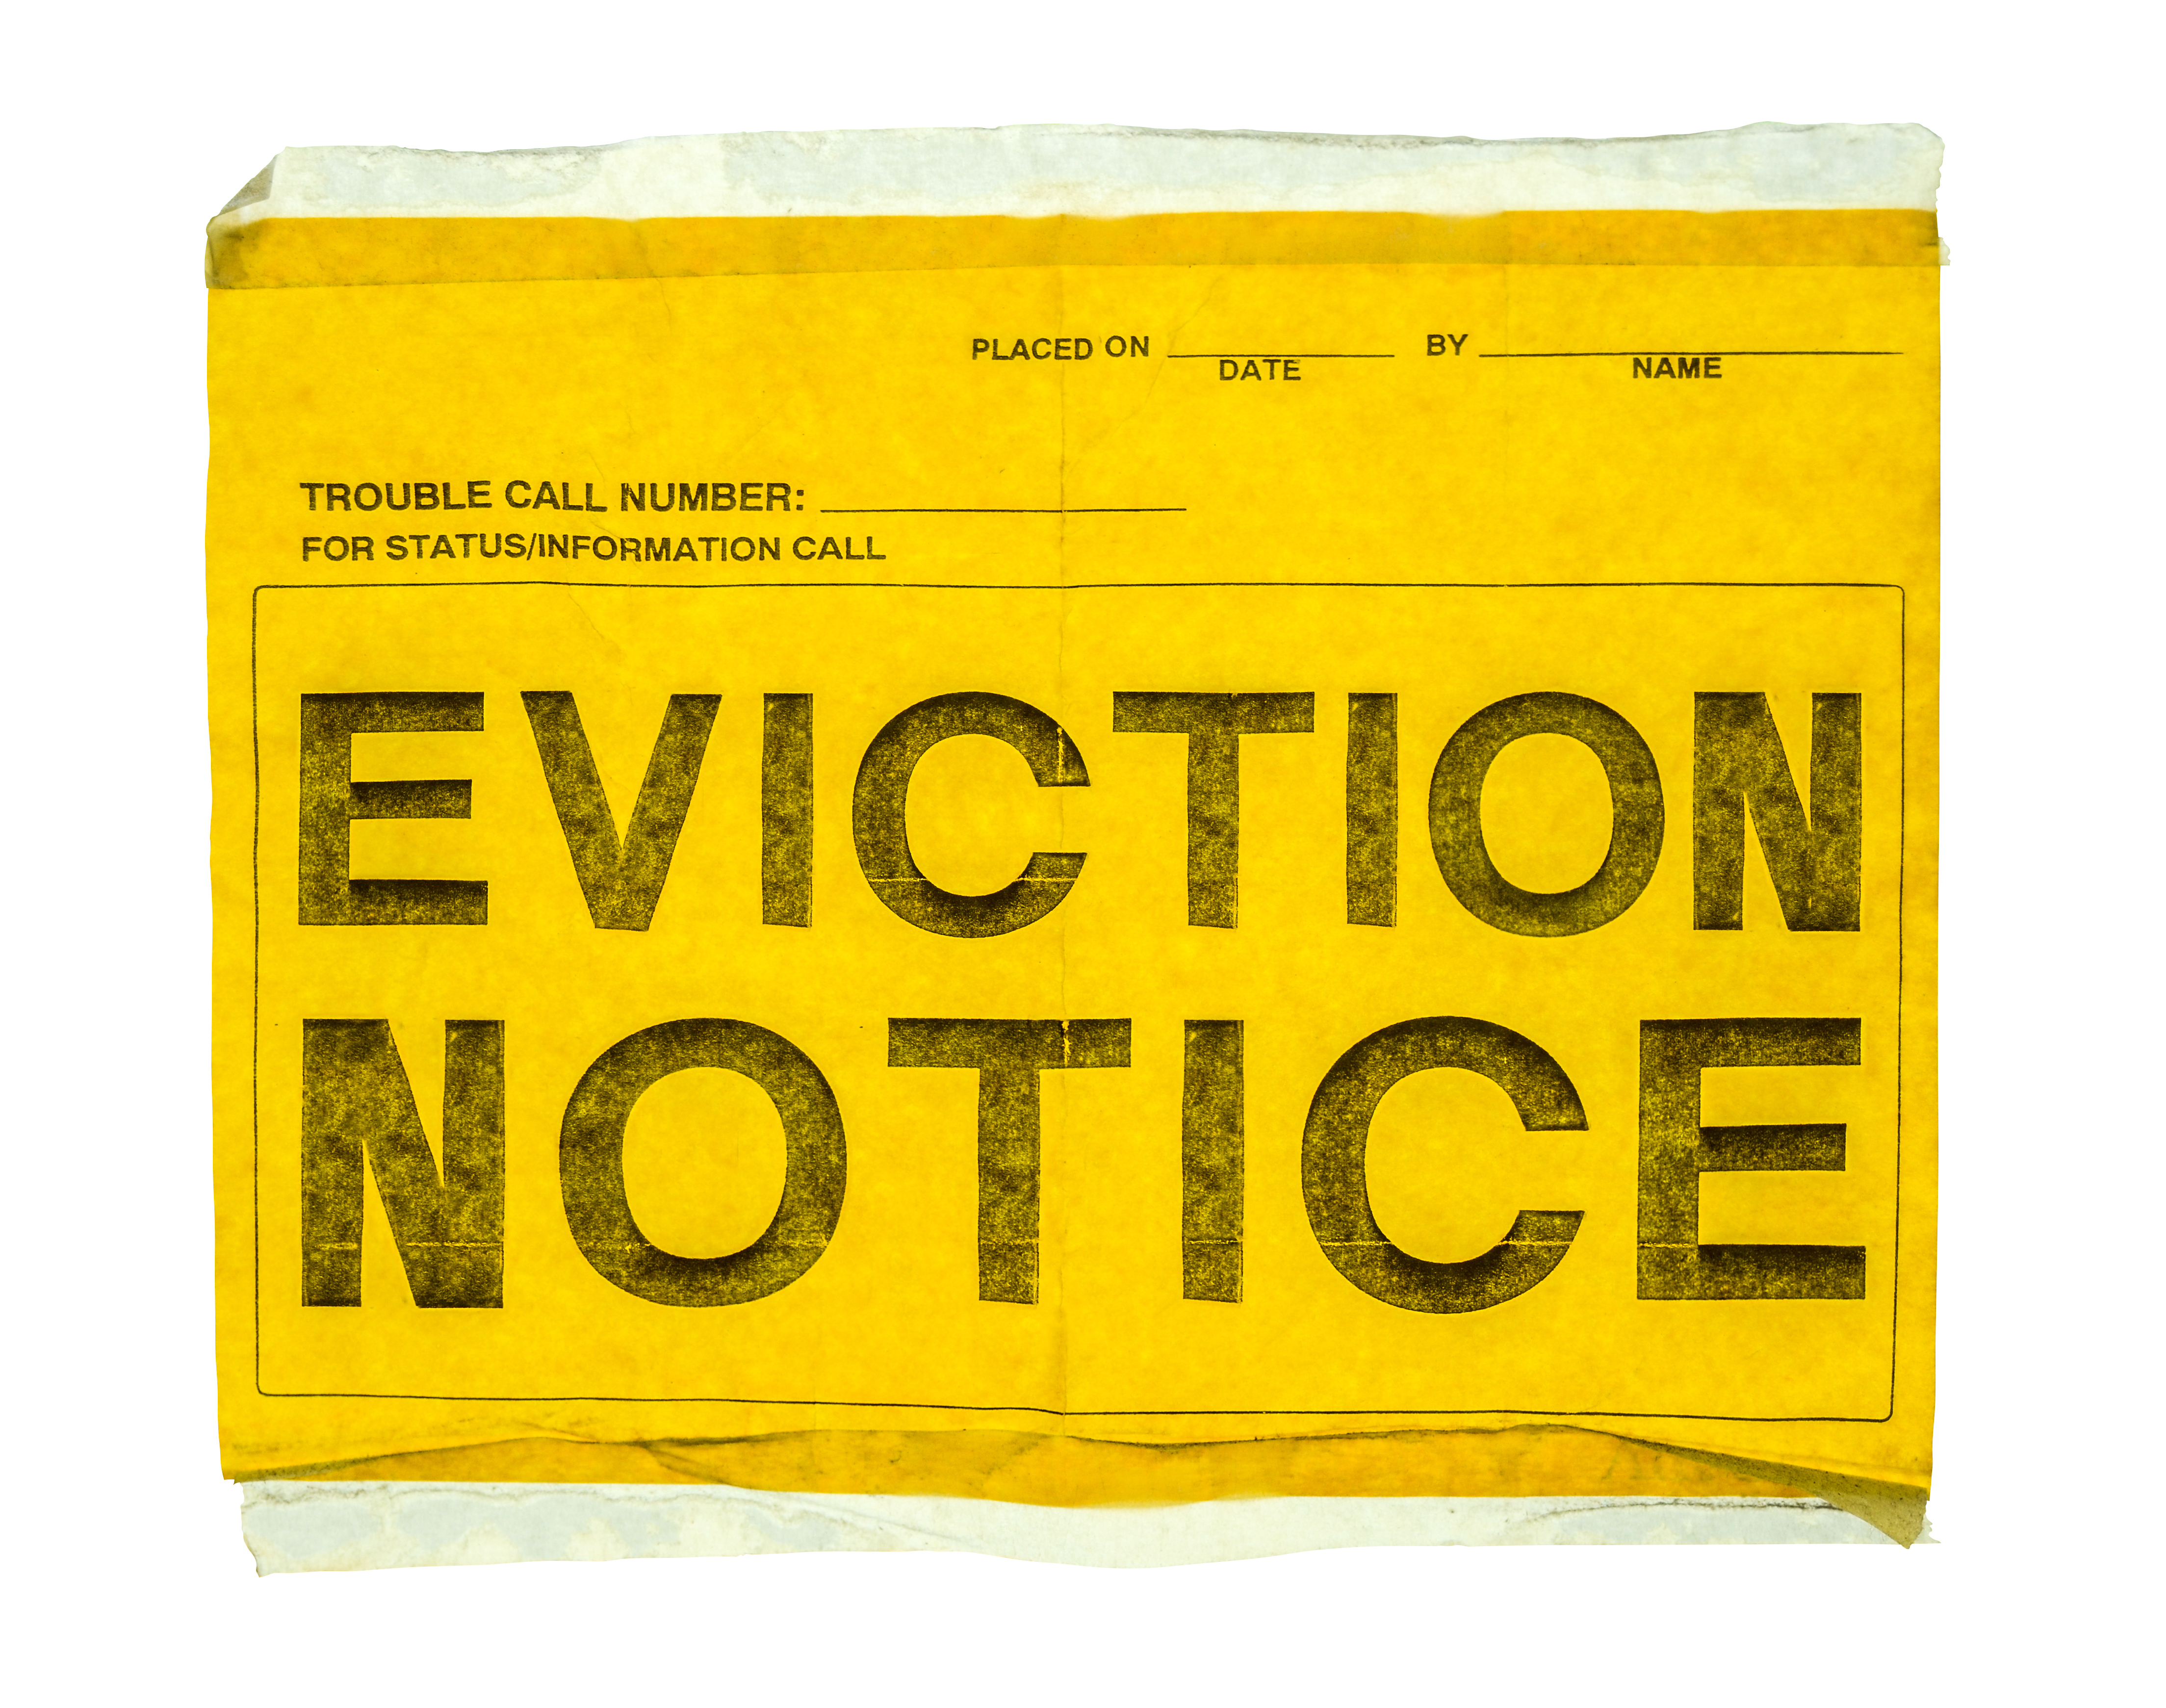 The Virginia Evictors Catalog is part of the Virginia Housing Justice Atlas project, which is being steered by an advisory committee made up of representatives from housing justice organizations in the Richmond and Charlottesville areas.